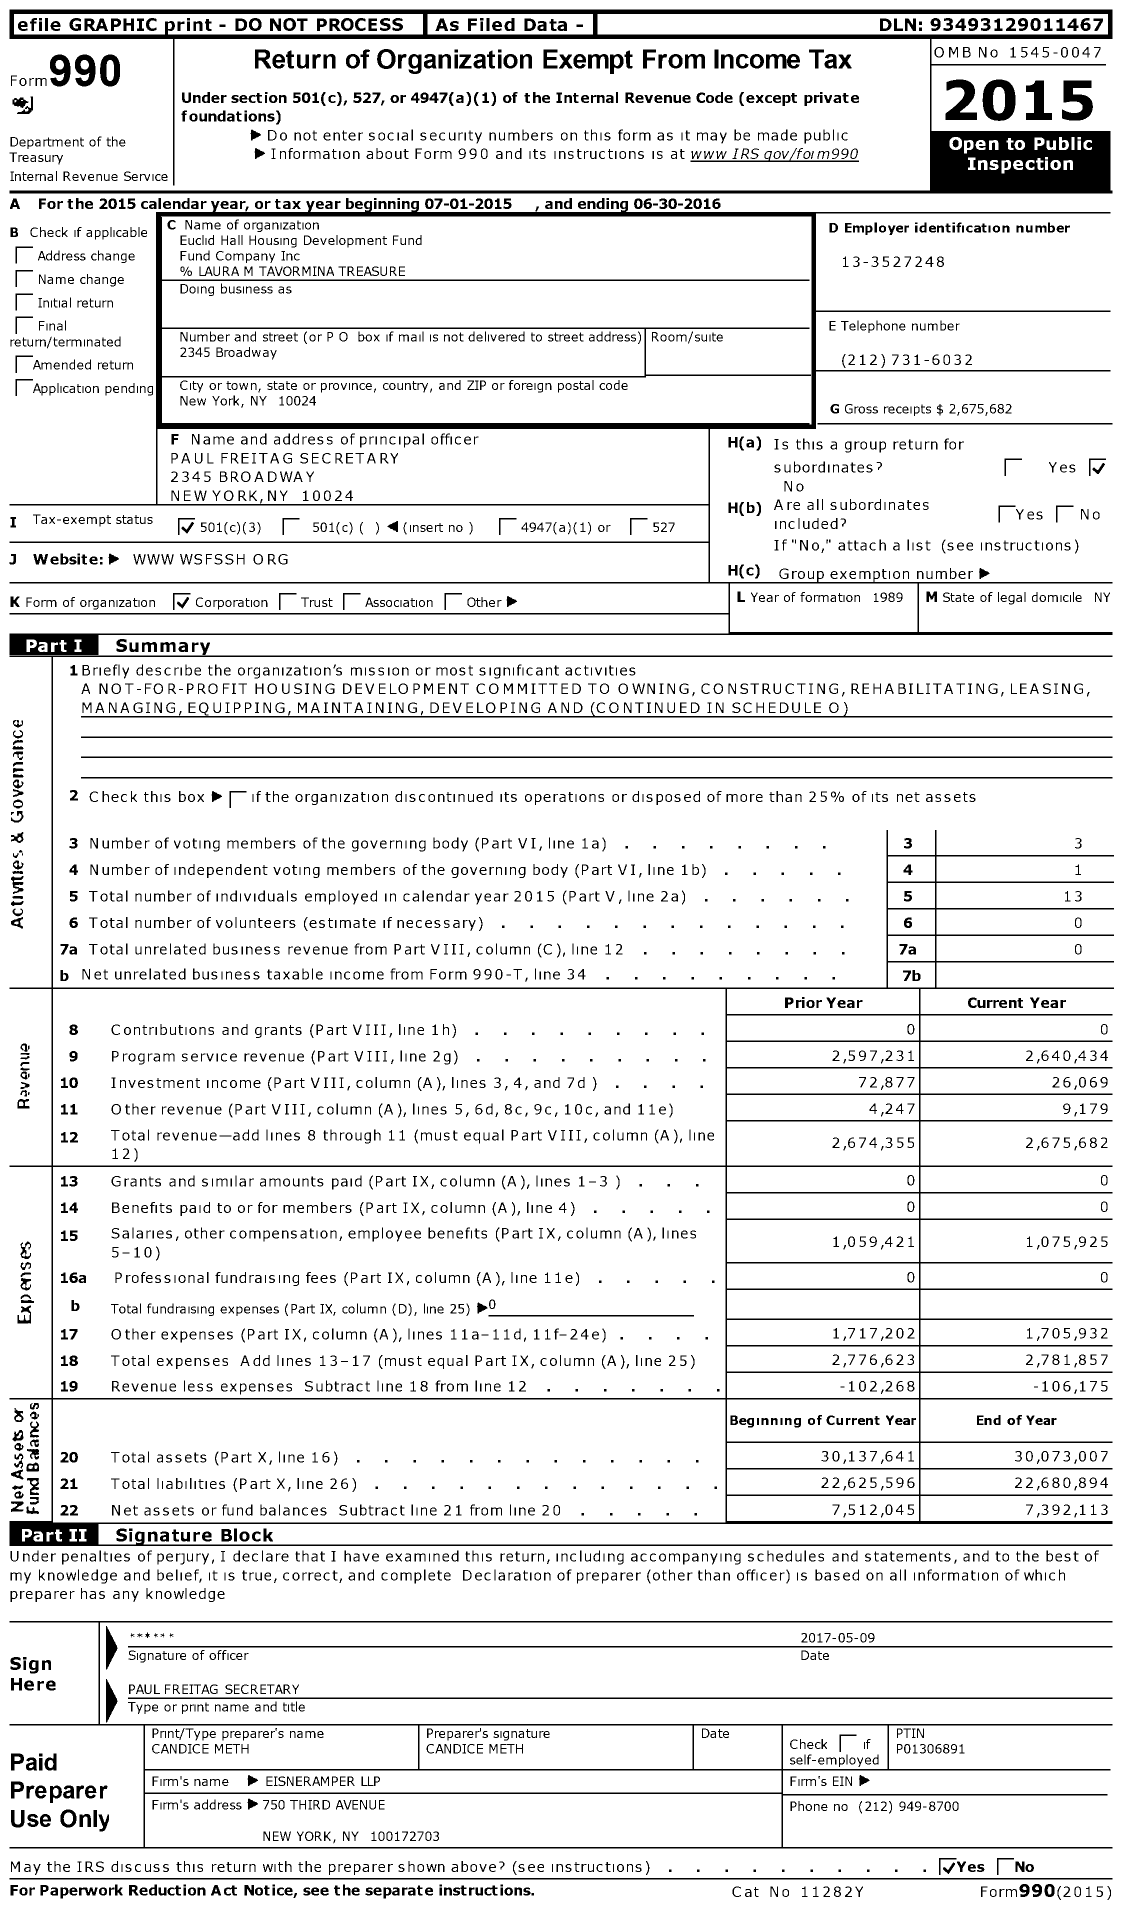 Image of first page of 2015 Form 990 for Euclid Hall Housing Development Fund Company